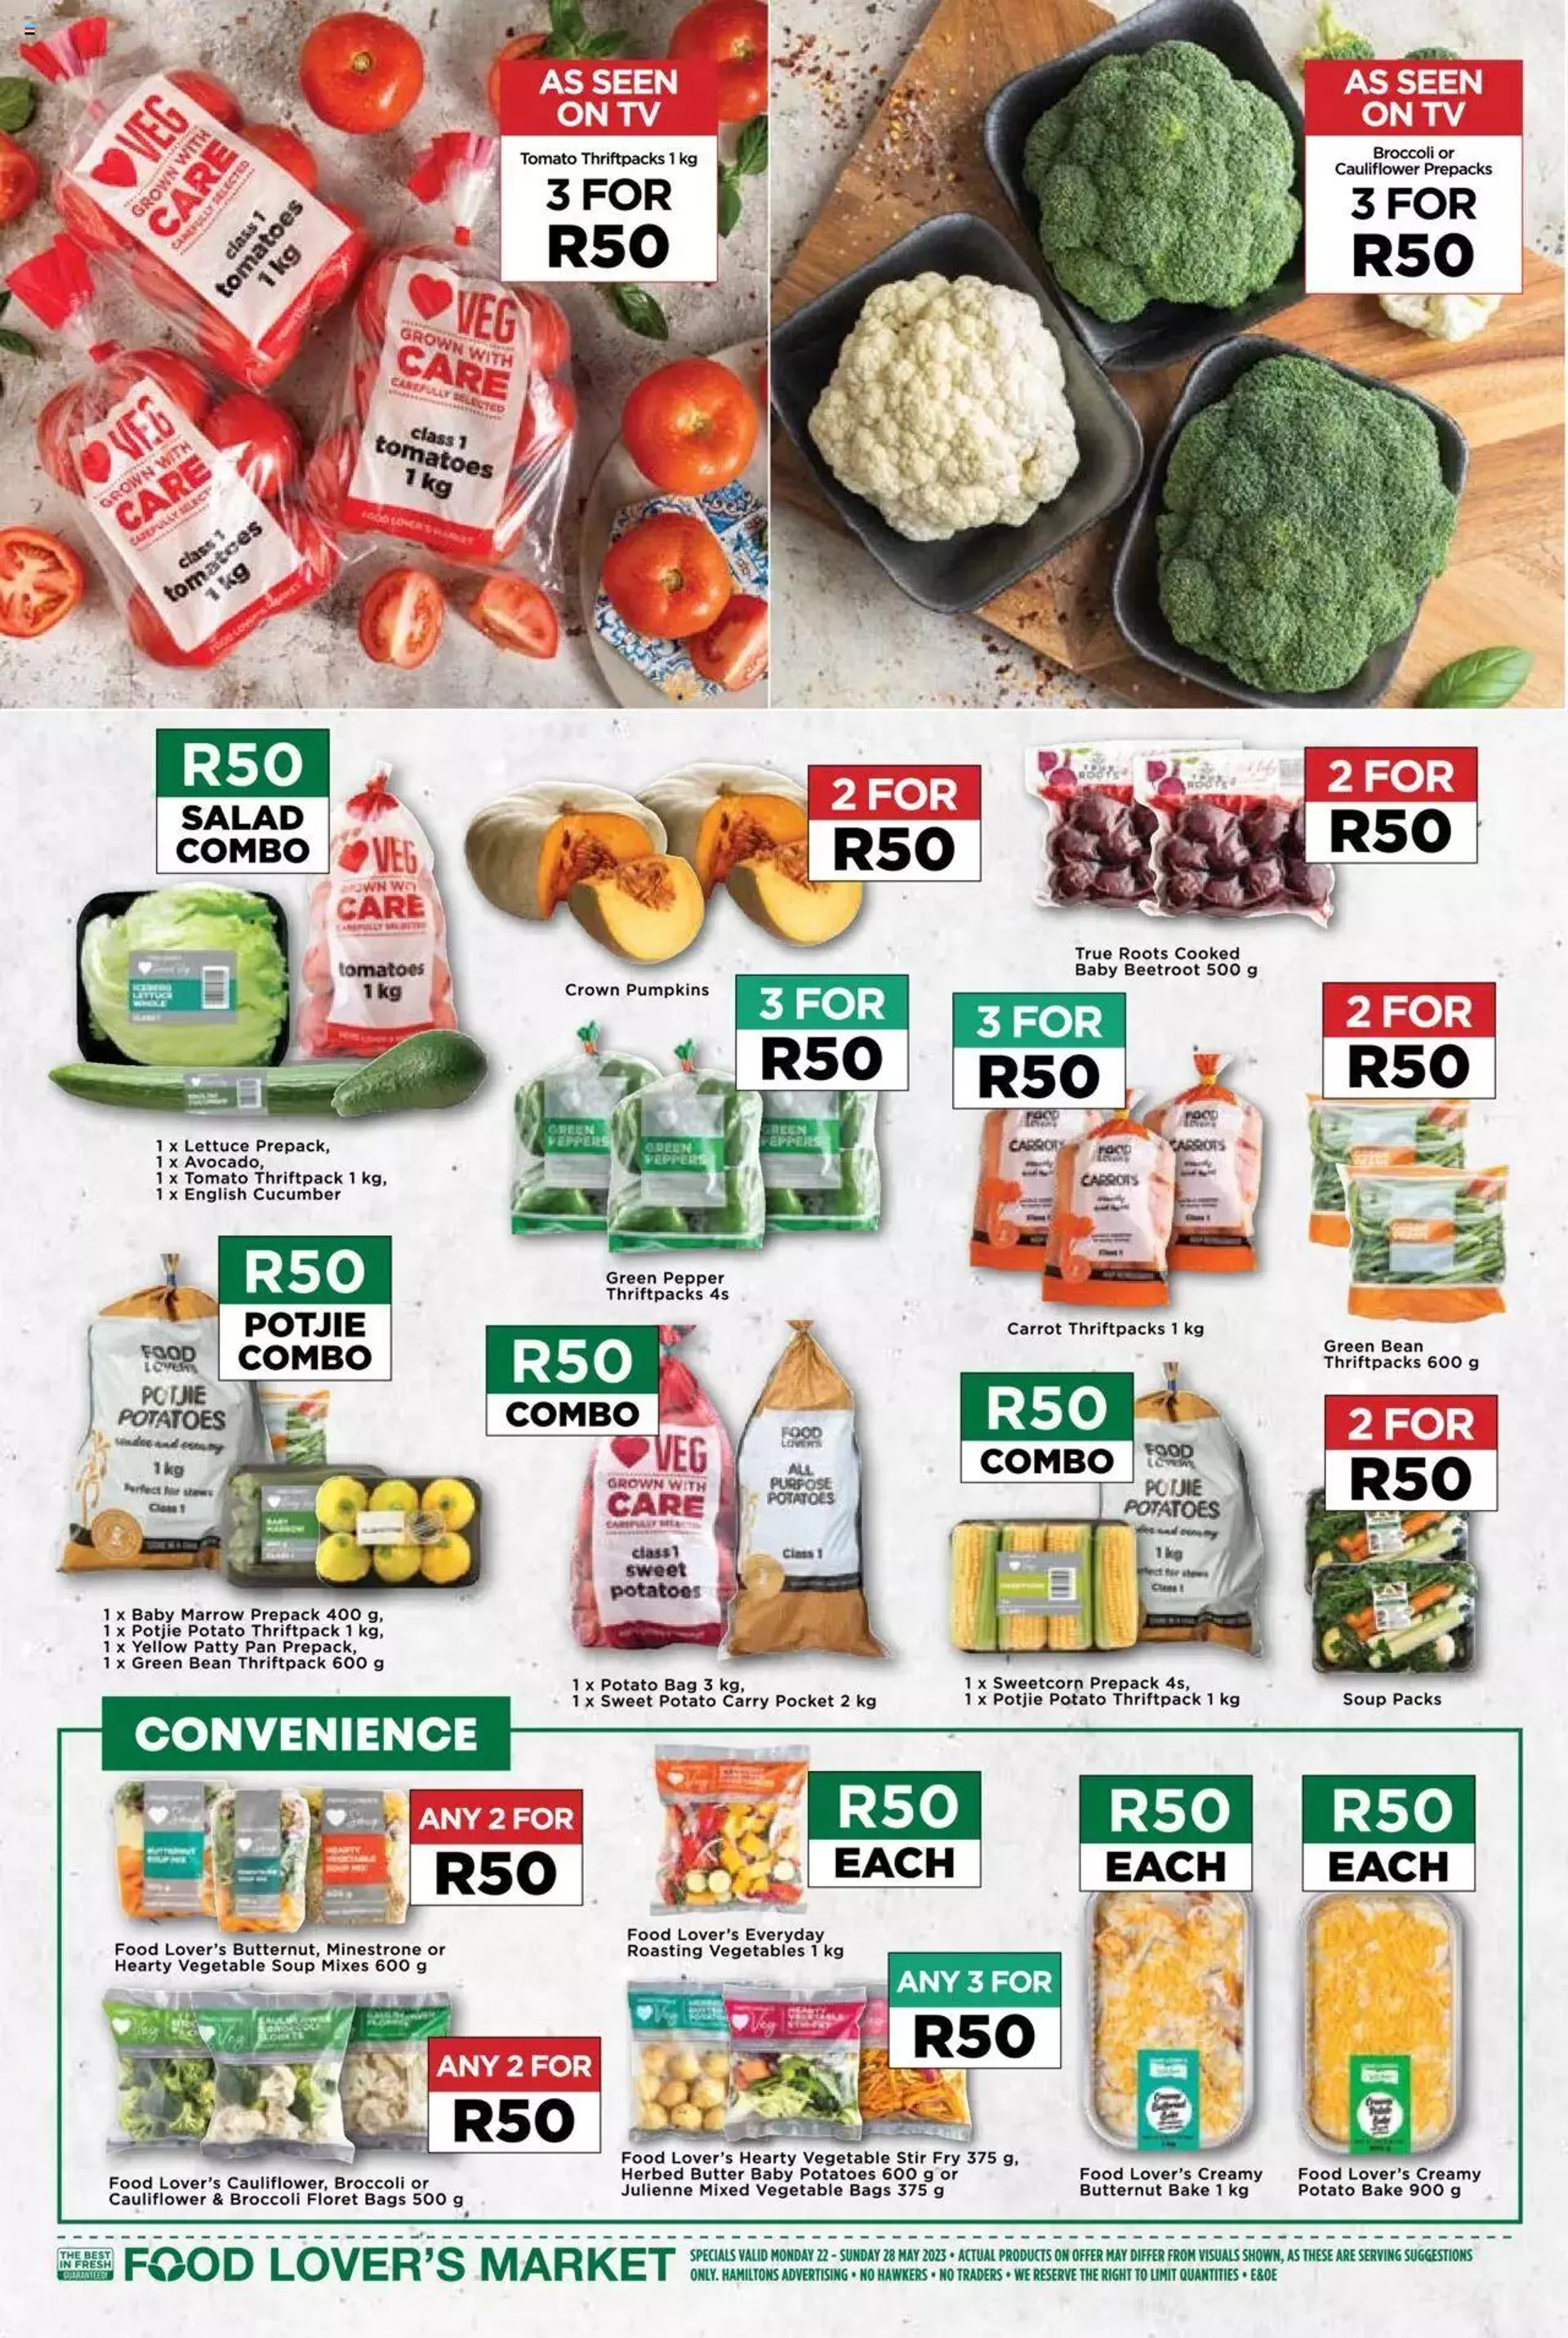 Food Lovers Market Inland Provinces - Weekly Specials - 1